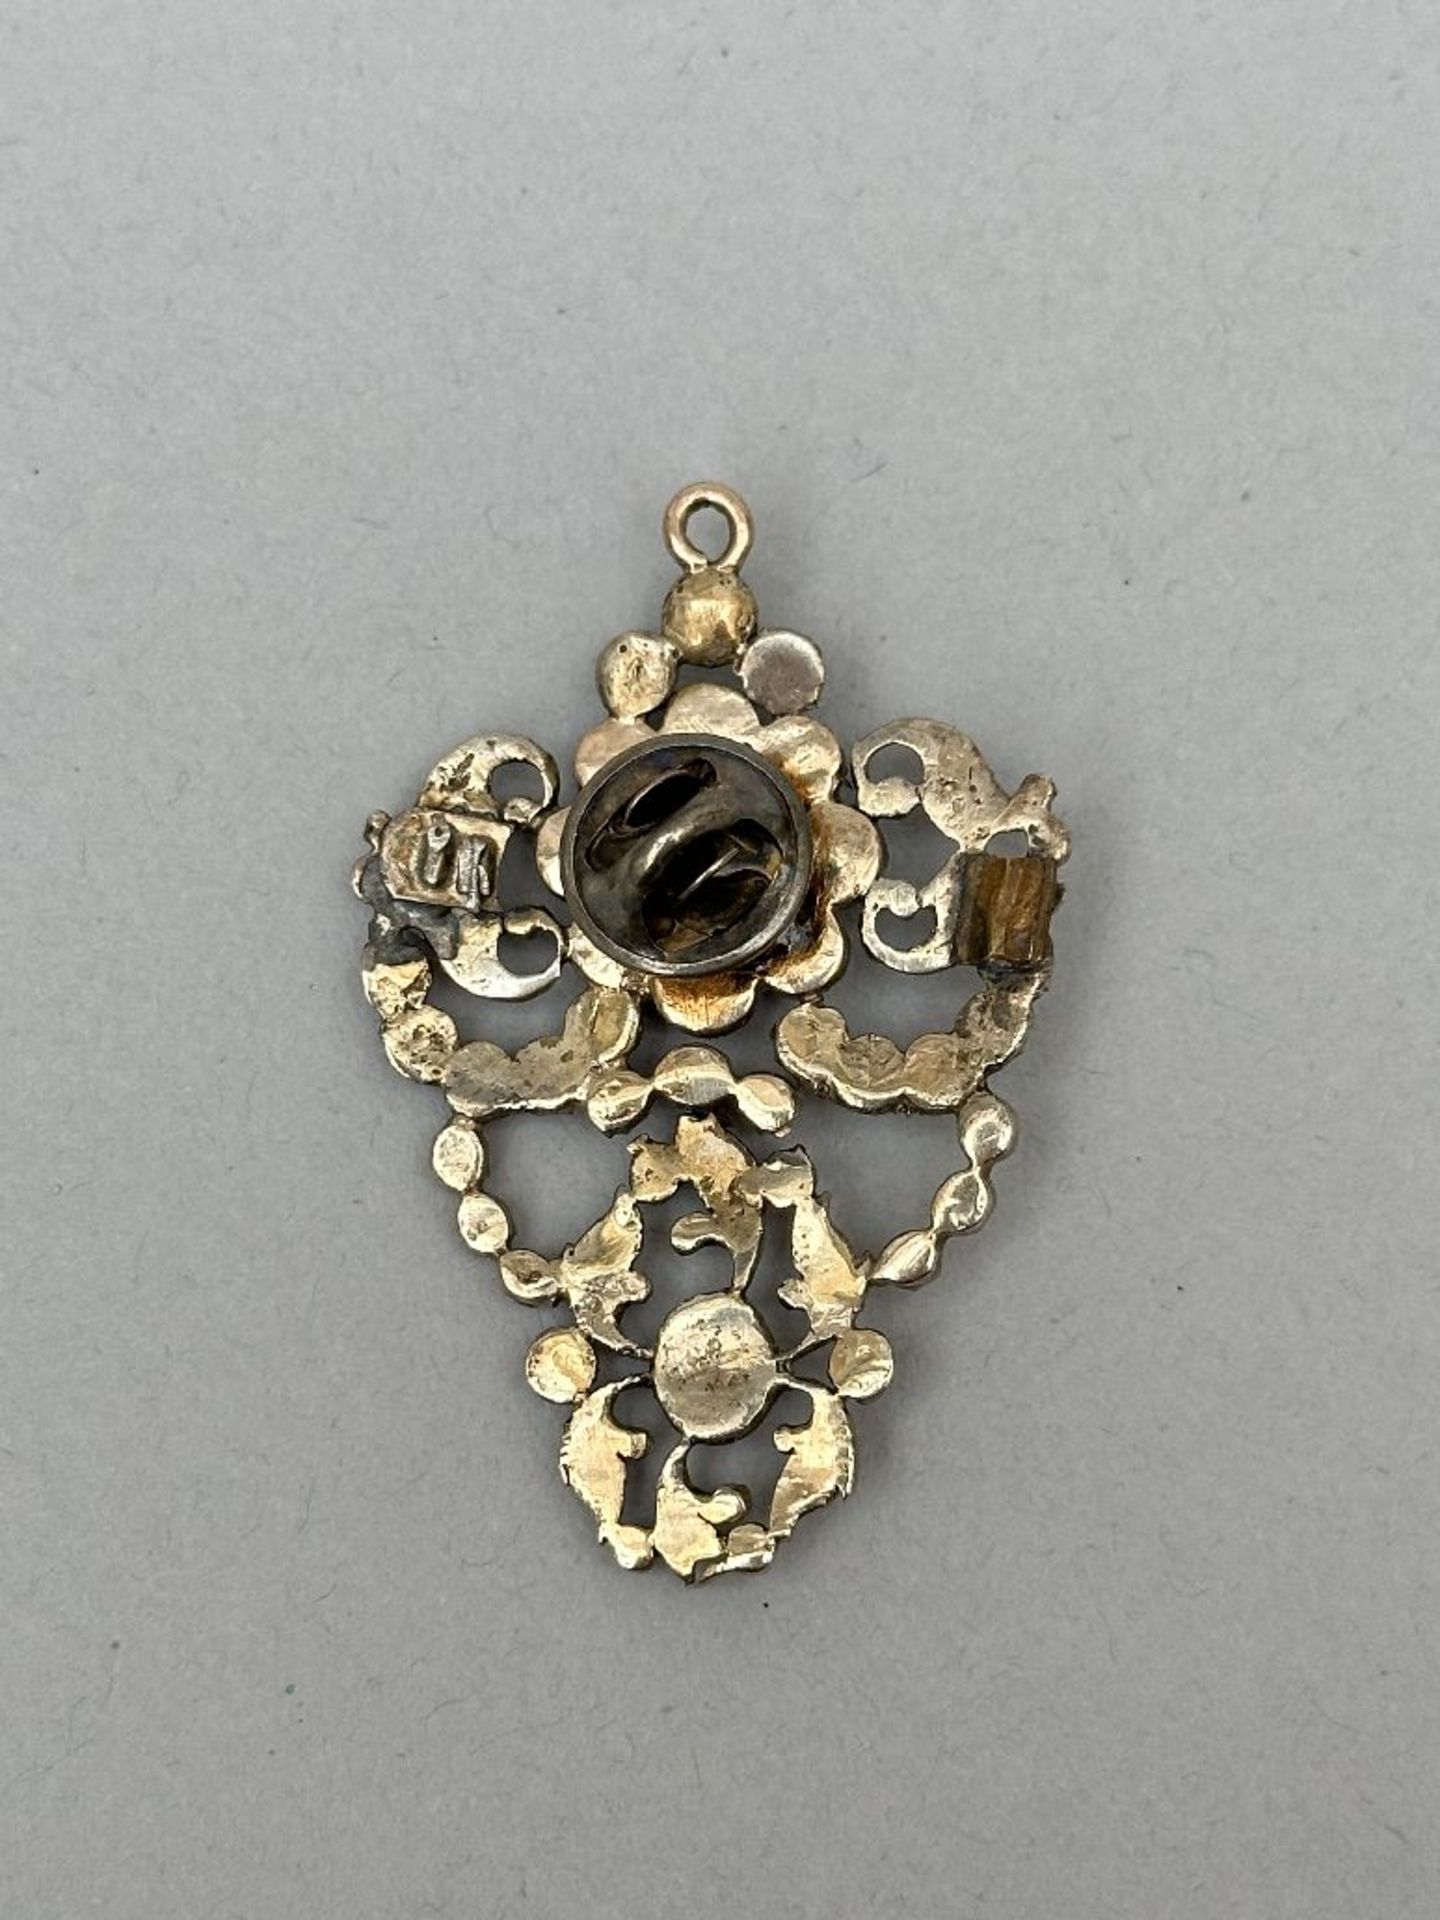 Flemish jewelry: flower brooch and pendant - Image 5 of 5